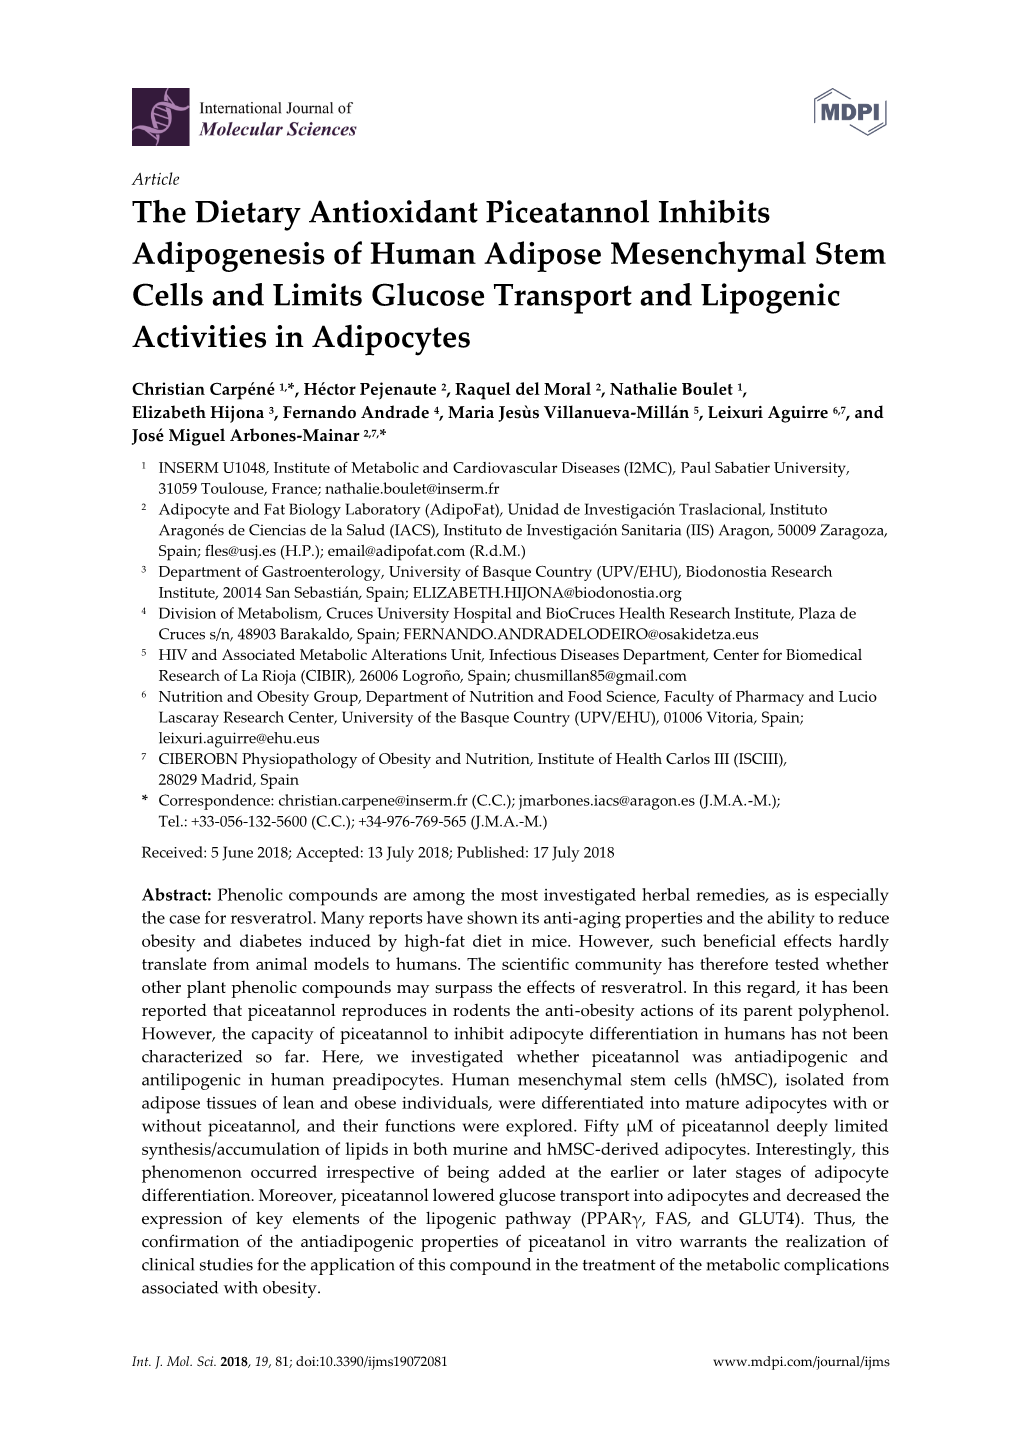 The Dietary Antioxidant Piceatannol Inhibits Adipogenesis of Human Adipose Mesenchymal Stem Cells and Limits Glucose Transport and Lipogenic Activities in Adipocytes